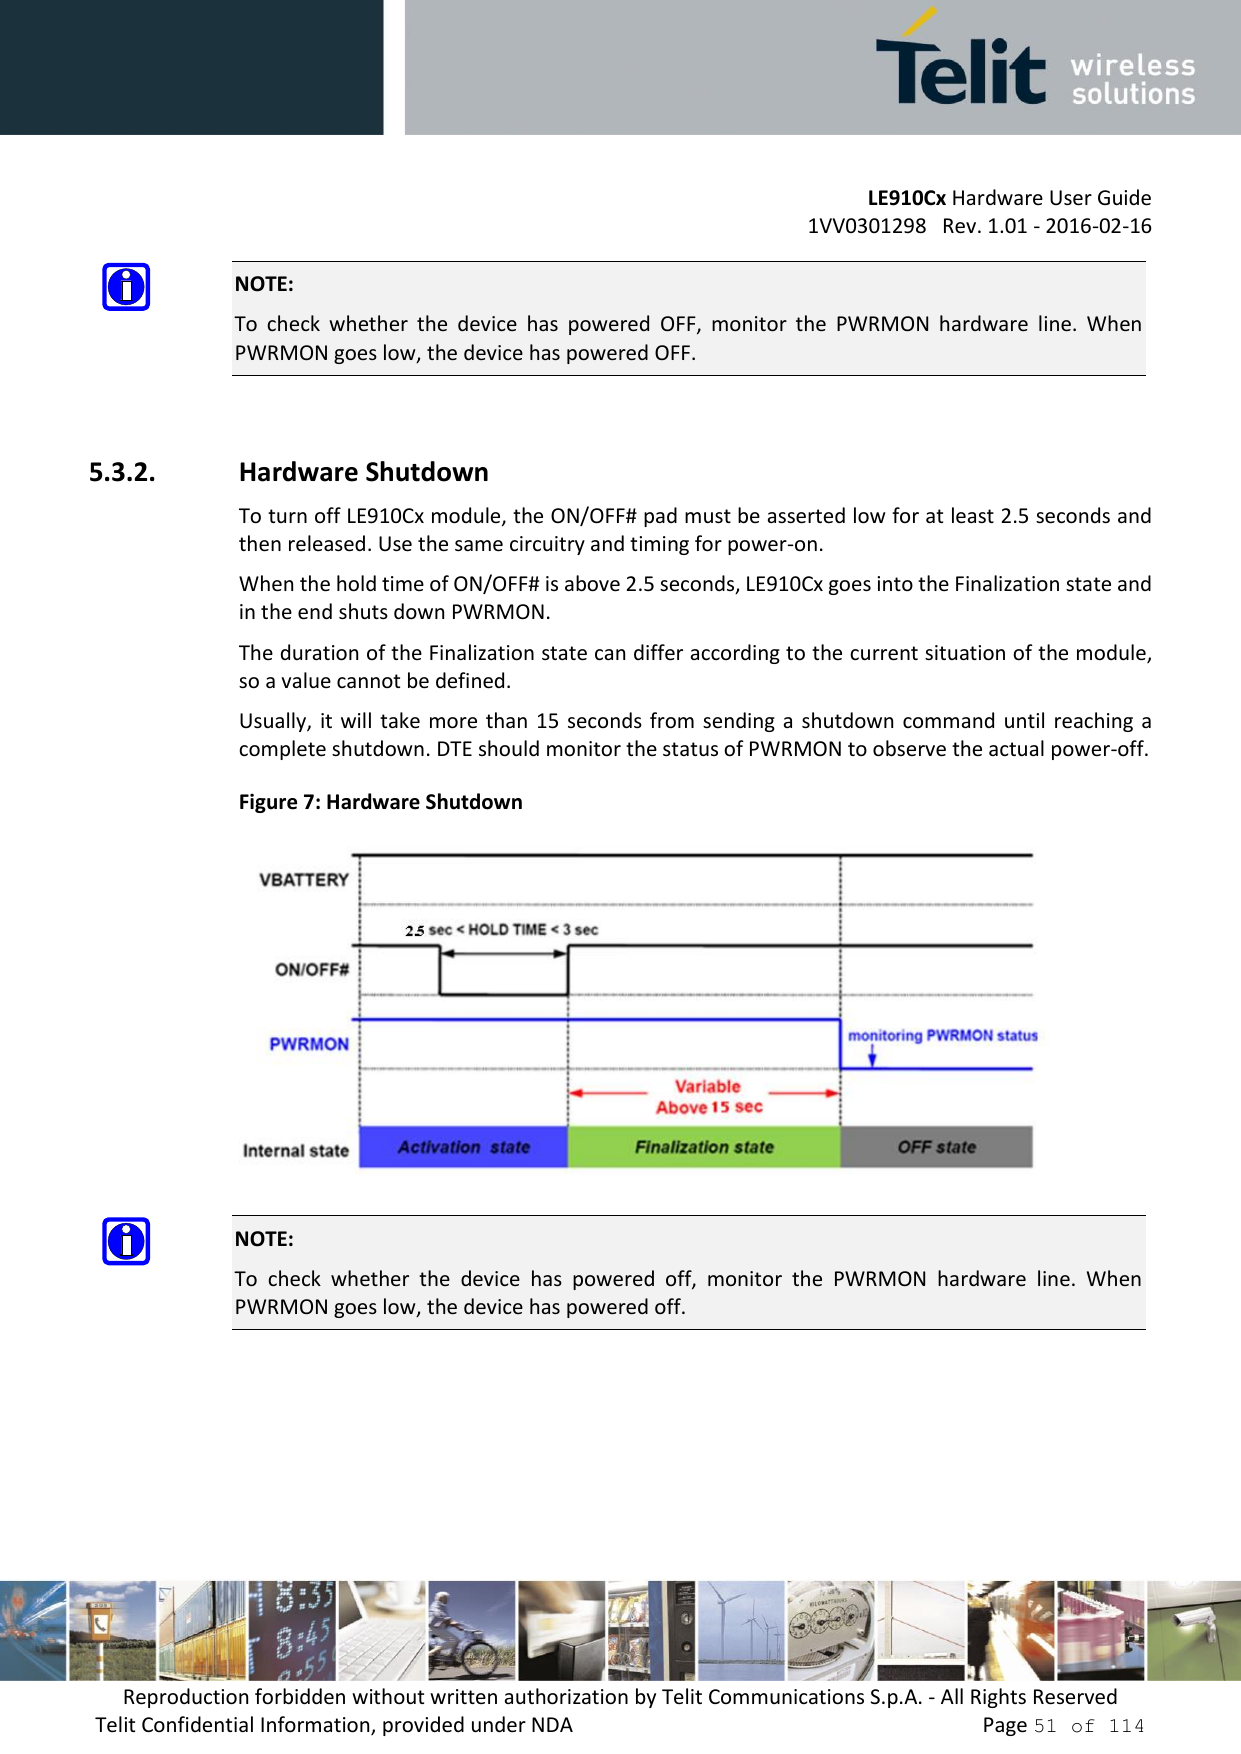         LE910Cx Hardware User Guide     1VV0301298   Rev. 1.01 - 2016-02-16 Reproduction forbidden without written authorization by Telit Communications S.p.A. - All Rights Reserved Telit Confidential Information, provided under NDA                 Page 51 of 114  NOTE: To  check  whether  the  device  has  powered  OFF,  monitor  the  PWRMON  hardware  line.  When PWRMON goes low, the device has powered OFF.  5.3.2. Hardware Shutdown To turn off LE910Cx module, the ON/OFF# pad must be asserted low for at least 2.5 seconds and then released. Use the same circuitry and timing for power-on. When the hold time of ON/OFF# is above 2.5 seconds, LE910Cx goes into the Finalization state and in the end shuts down PWRMON. The duration of the Finalization state can differ according to the current situation of the module, so a value cannot be defined. Usually, it will  take more  than 15  seconds from sending a  shutdown  command until reaching a complete shutdown. DTE should monitor the status of PWRMON to observe the actual power-off. Figure 7: Hardware Shutdown   NOTE: To  check  whether  the  device  has  powered  off,  monitor  the  PWRMON  hardware  line.  When PWRMON goes low, the device has powered off.    